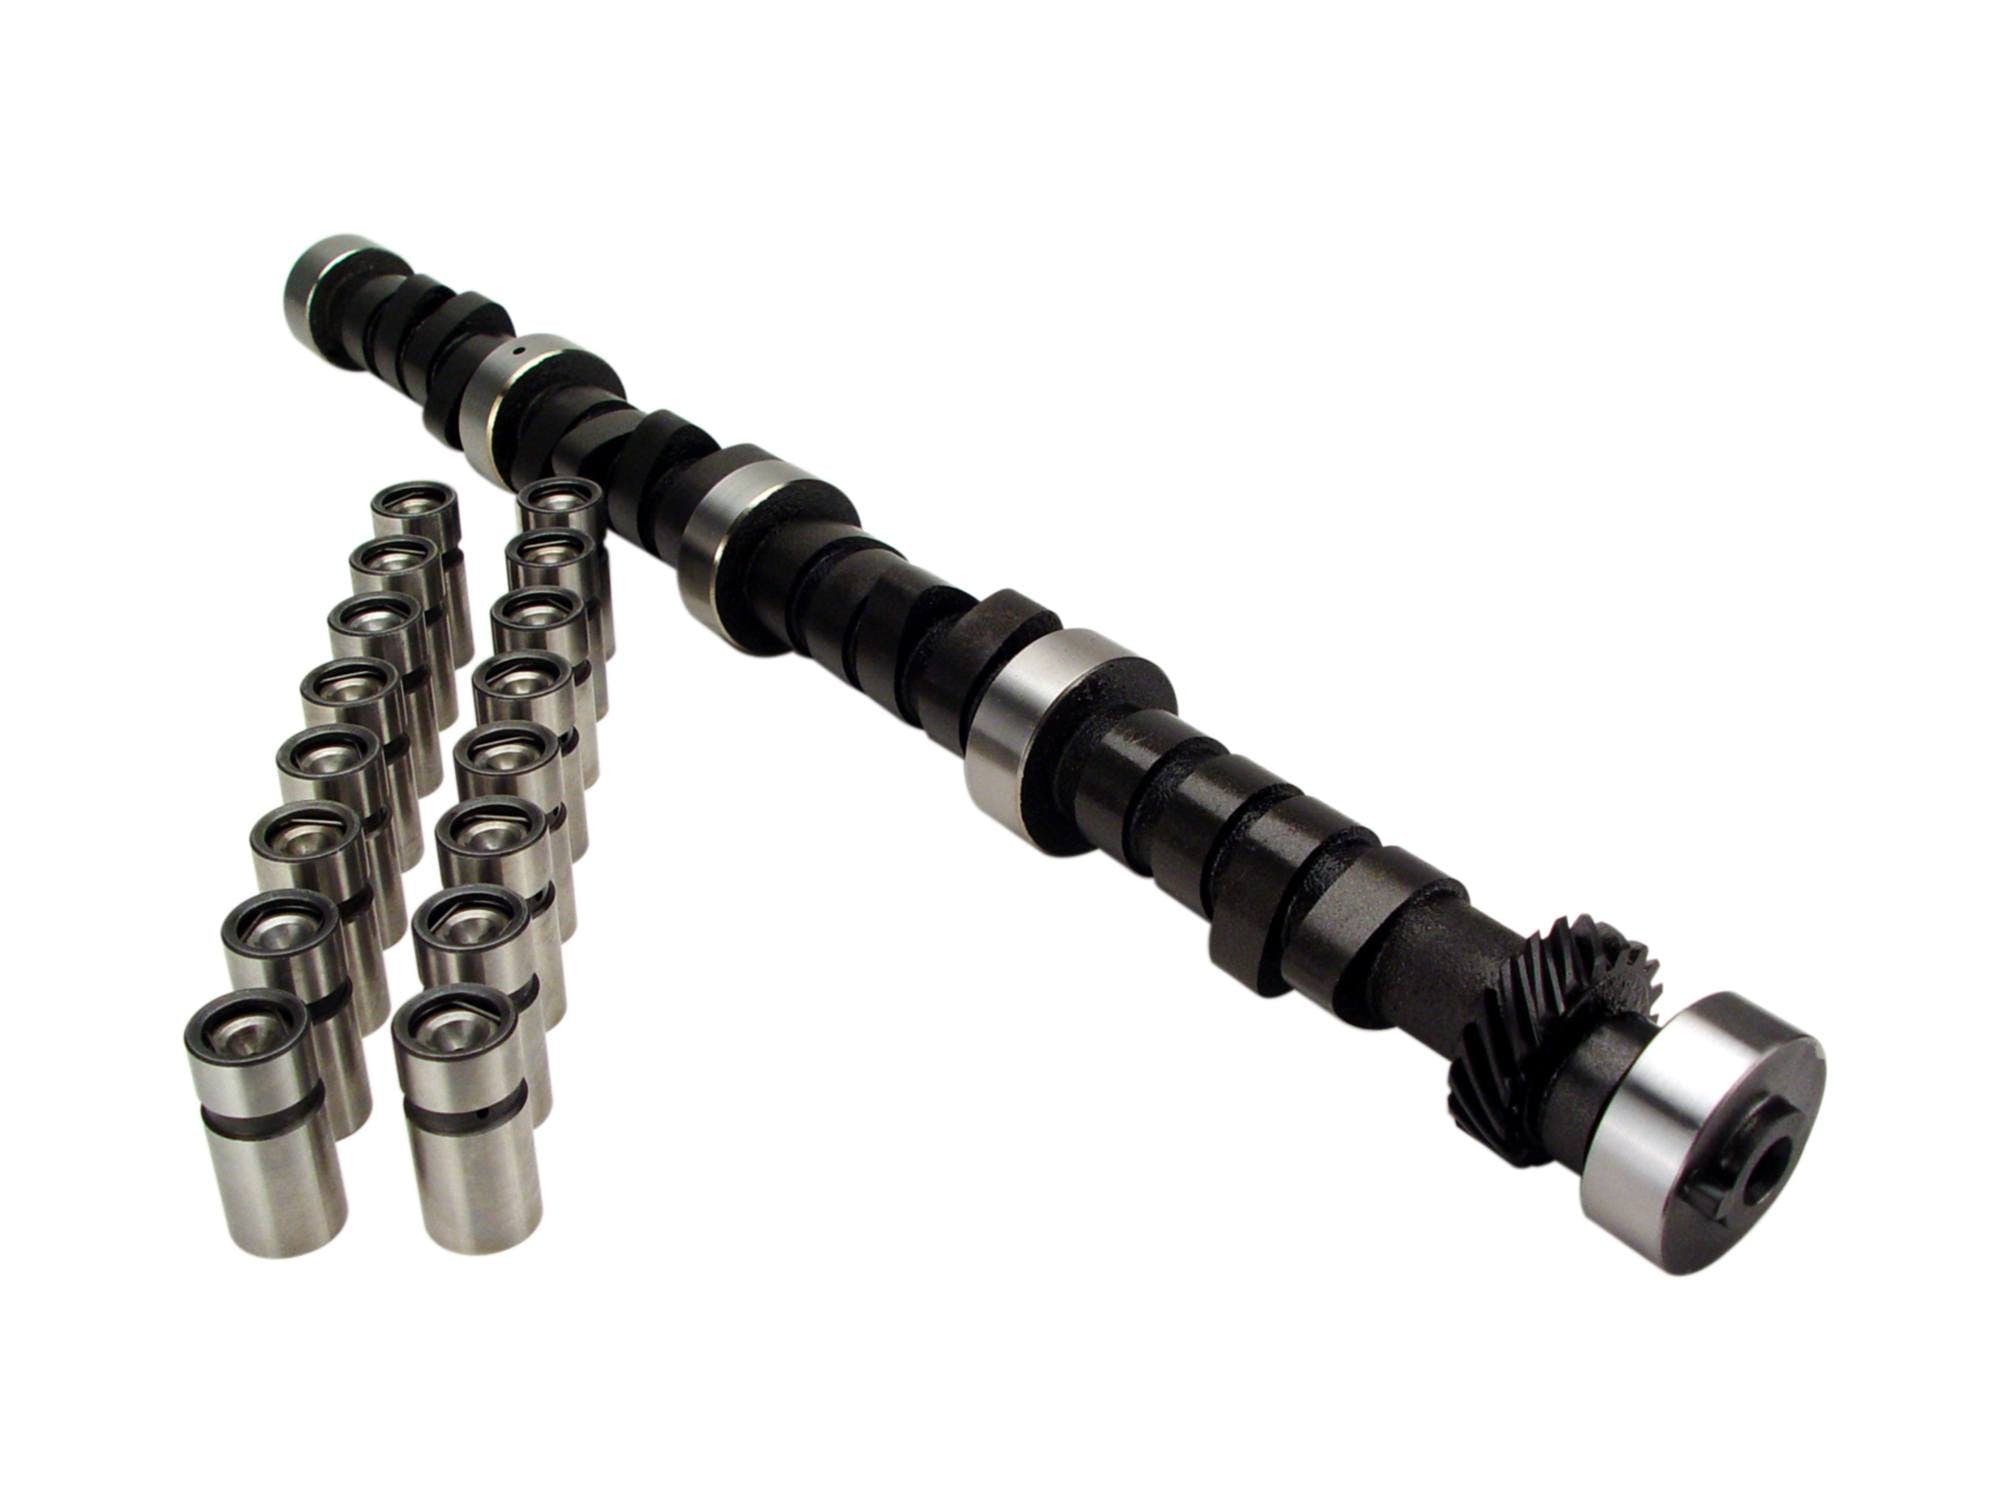 Competition Cams CL21-670-4 Nostalgia Plus Camshaft/Lifter Kit